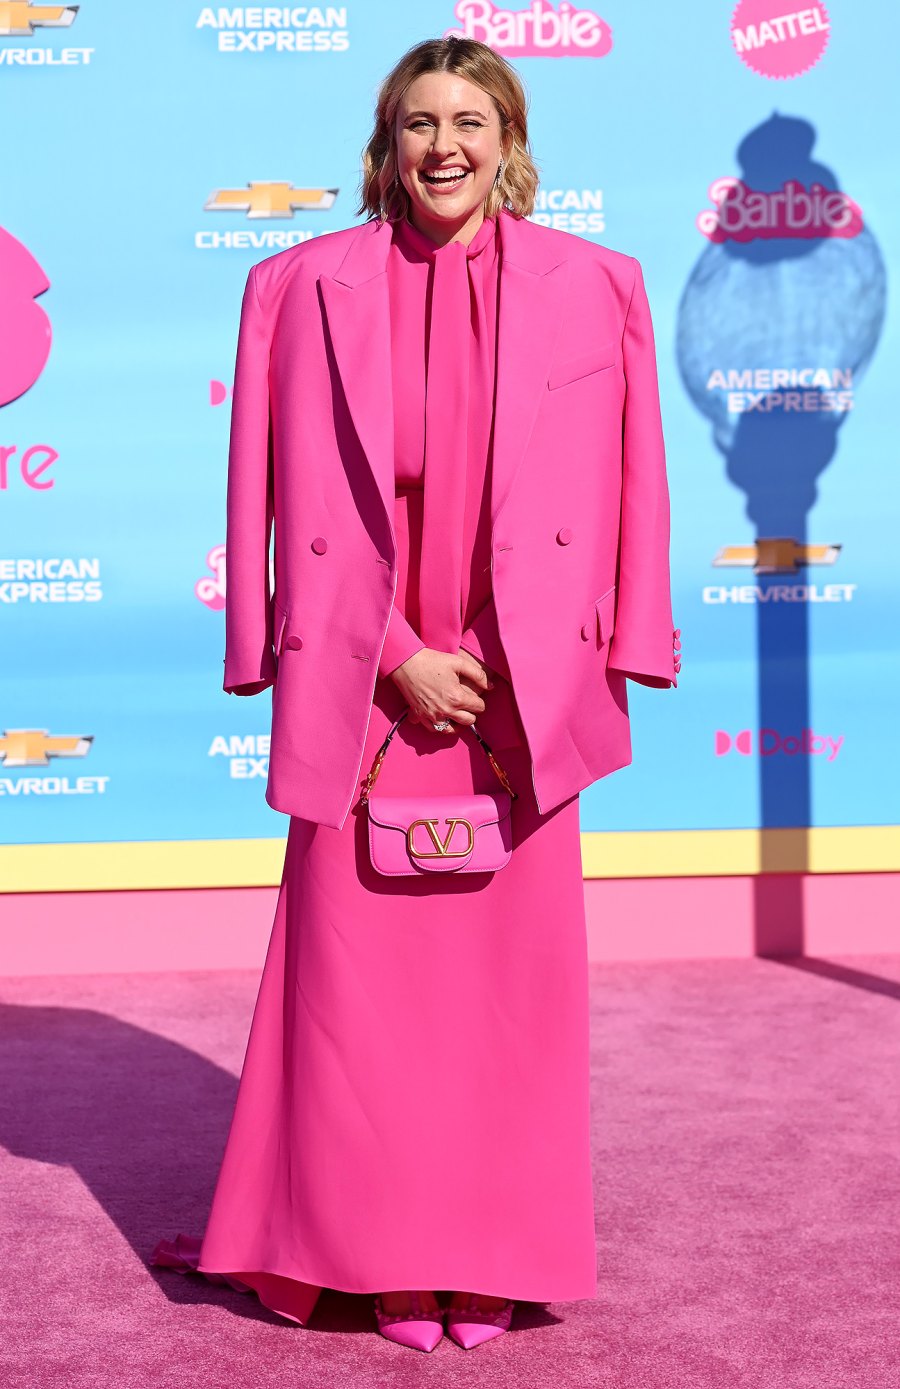 Barbiecore! See Anne Hathaway, Ciara, Kim Kardashian and More Rock the Head-to-Toe Hot Pink Trend gallery